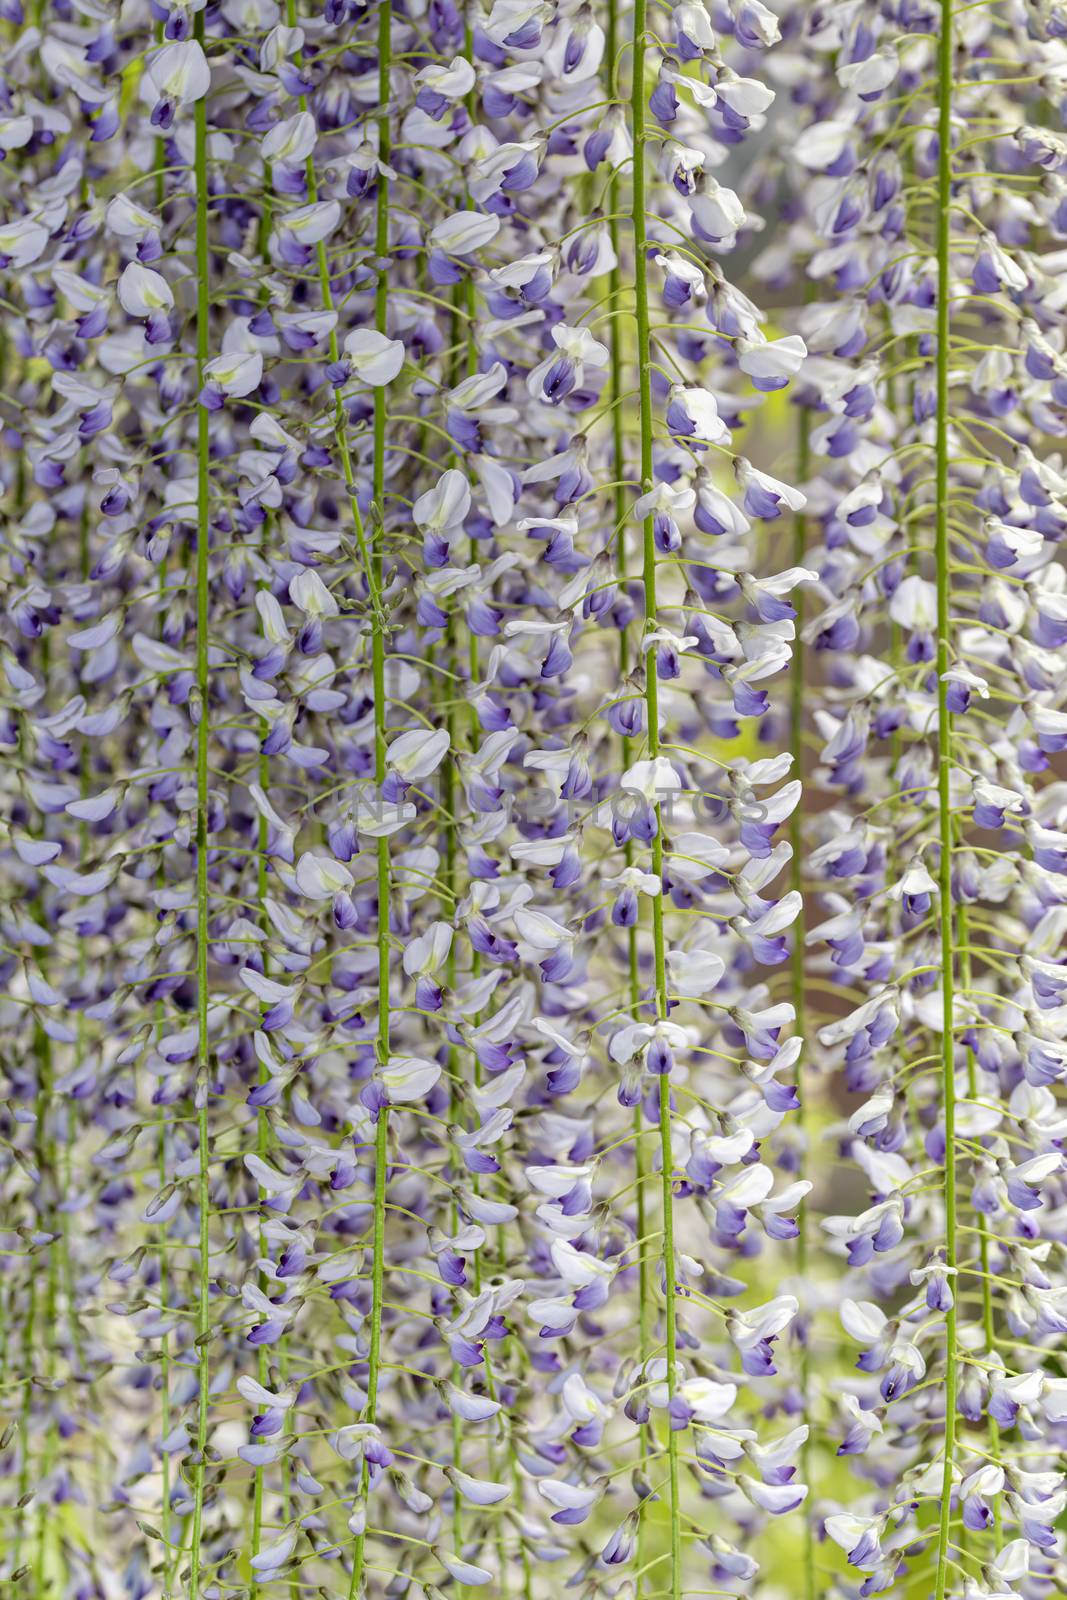 Group of Wisteria flowers forming a fence again a green wall